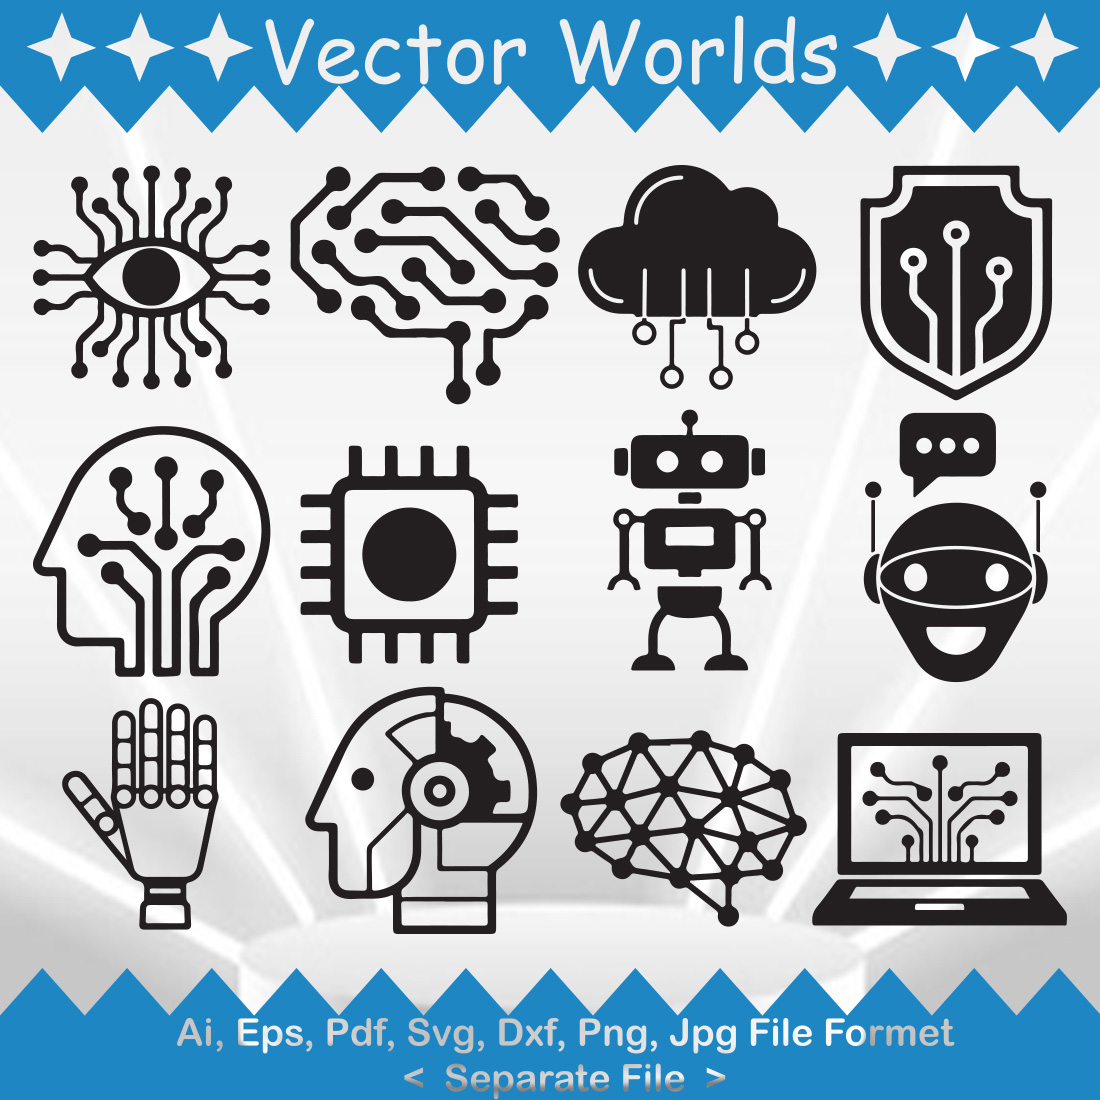 Artificial Intelligence SVG Vector Design cover image.